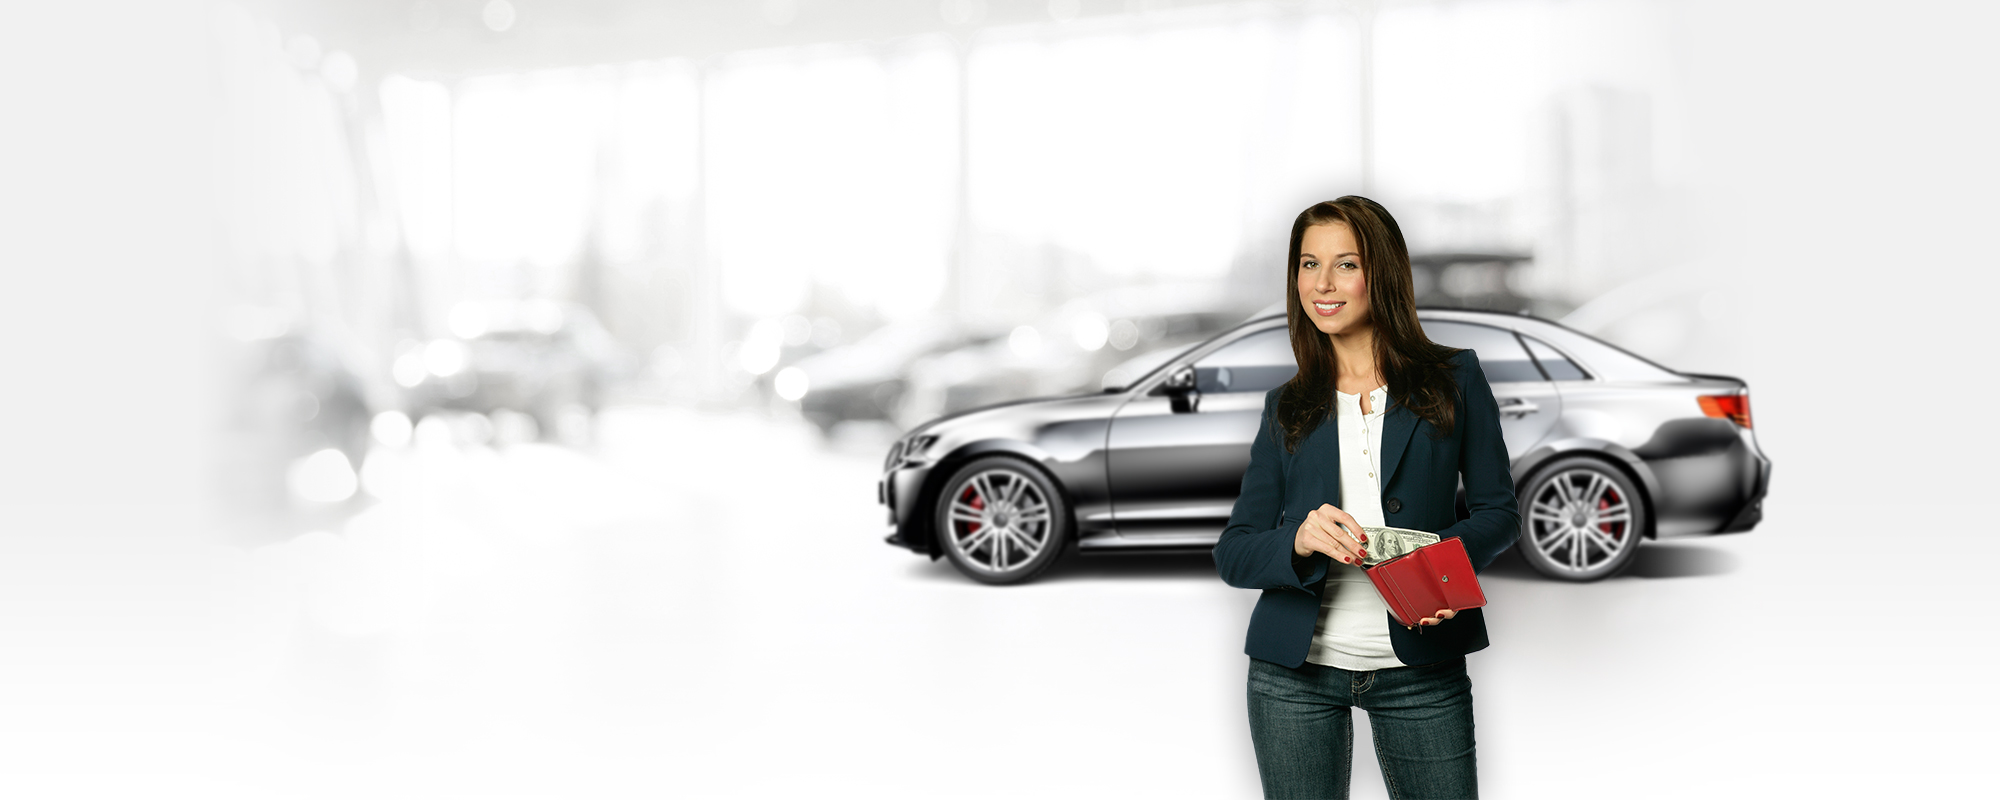 woman standing in front of car